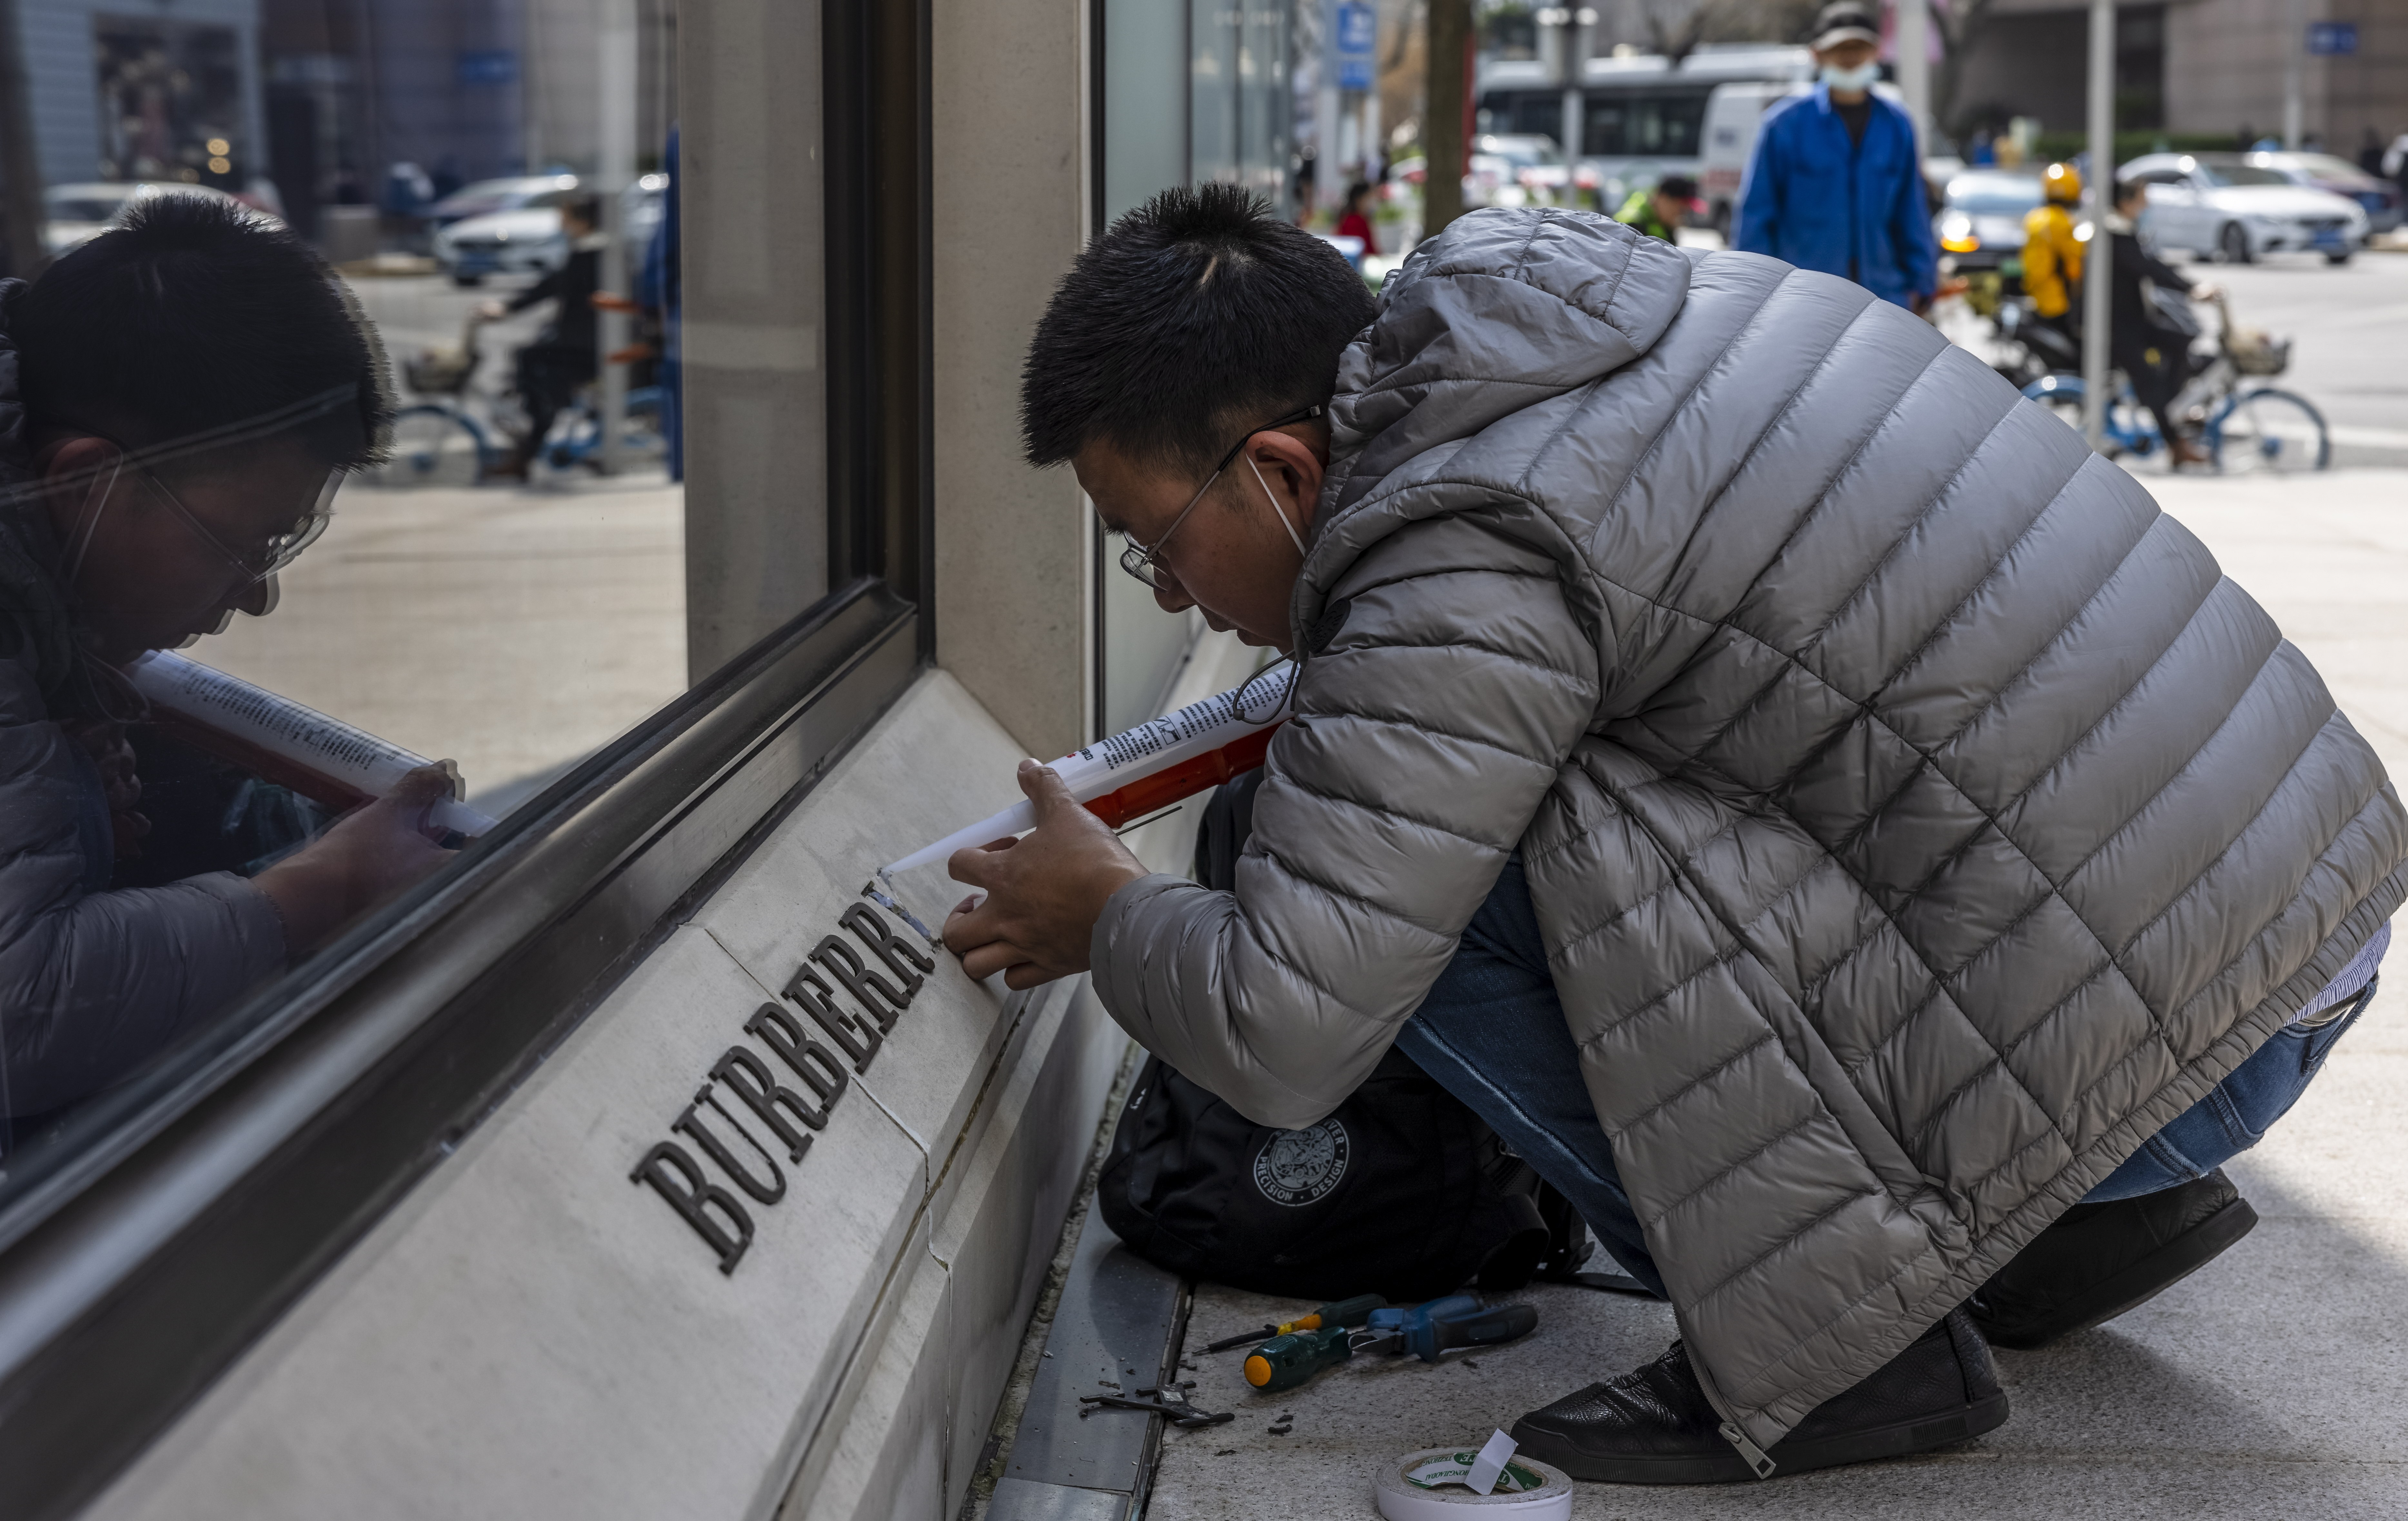 A man repairs a damaged logo in front of a Burberry store in Shanghai on March 26. The British designer was the first luxury brand to be targeted in China in a backlash against Western sanctions imposed over alleged human rights abuses in the Xinjiang region, after retailers including H&M and Nike were boycotted by Chinese shoppers over voicing concerns about cotton sourced from the Chinese region. Photo: EPA-EFE